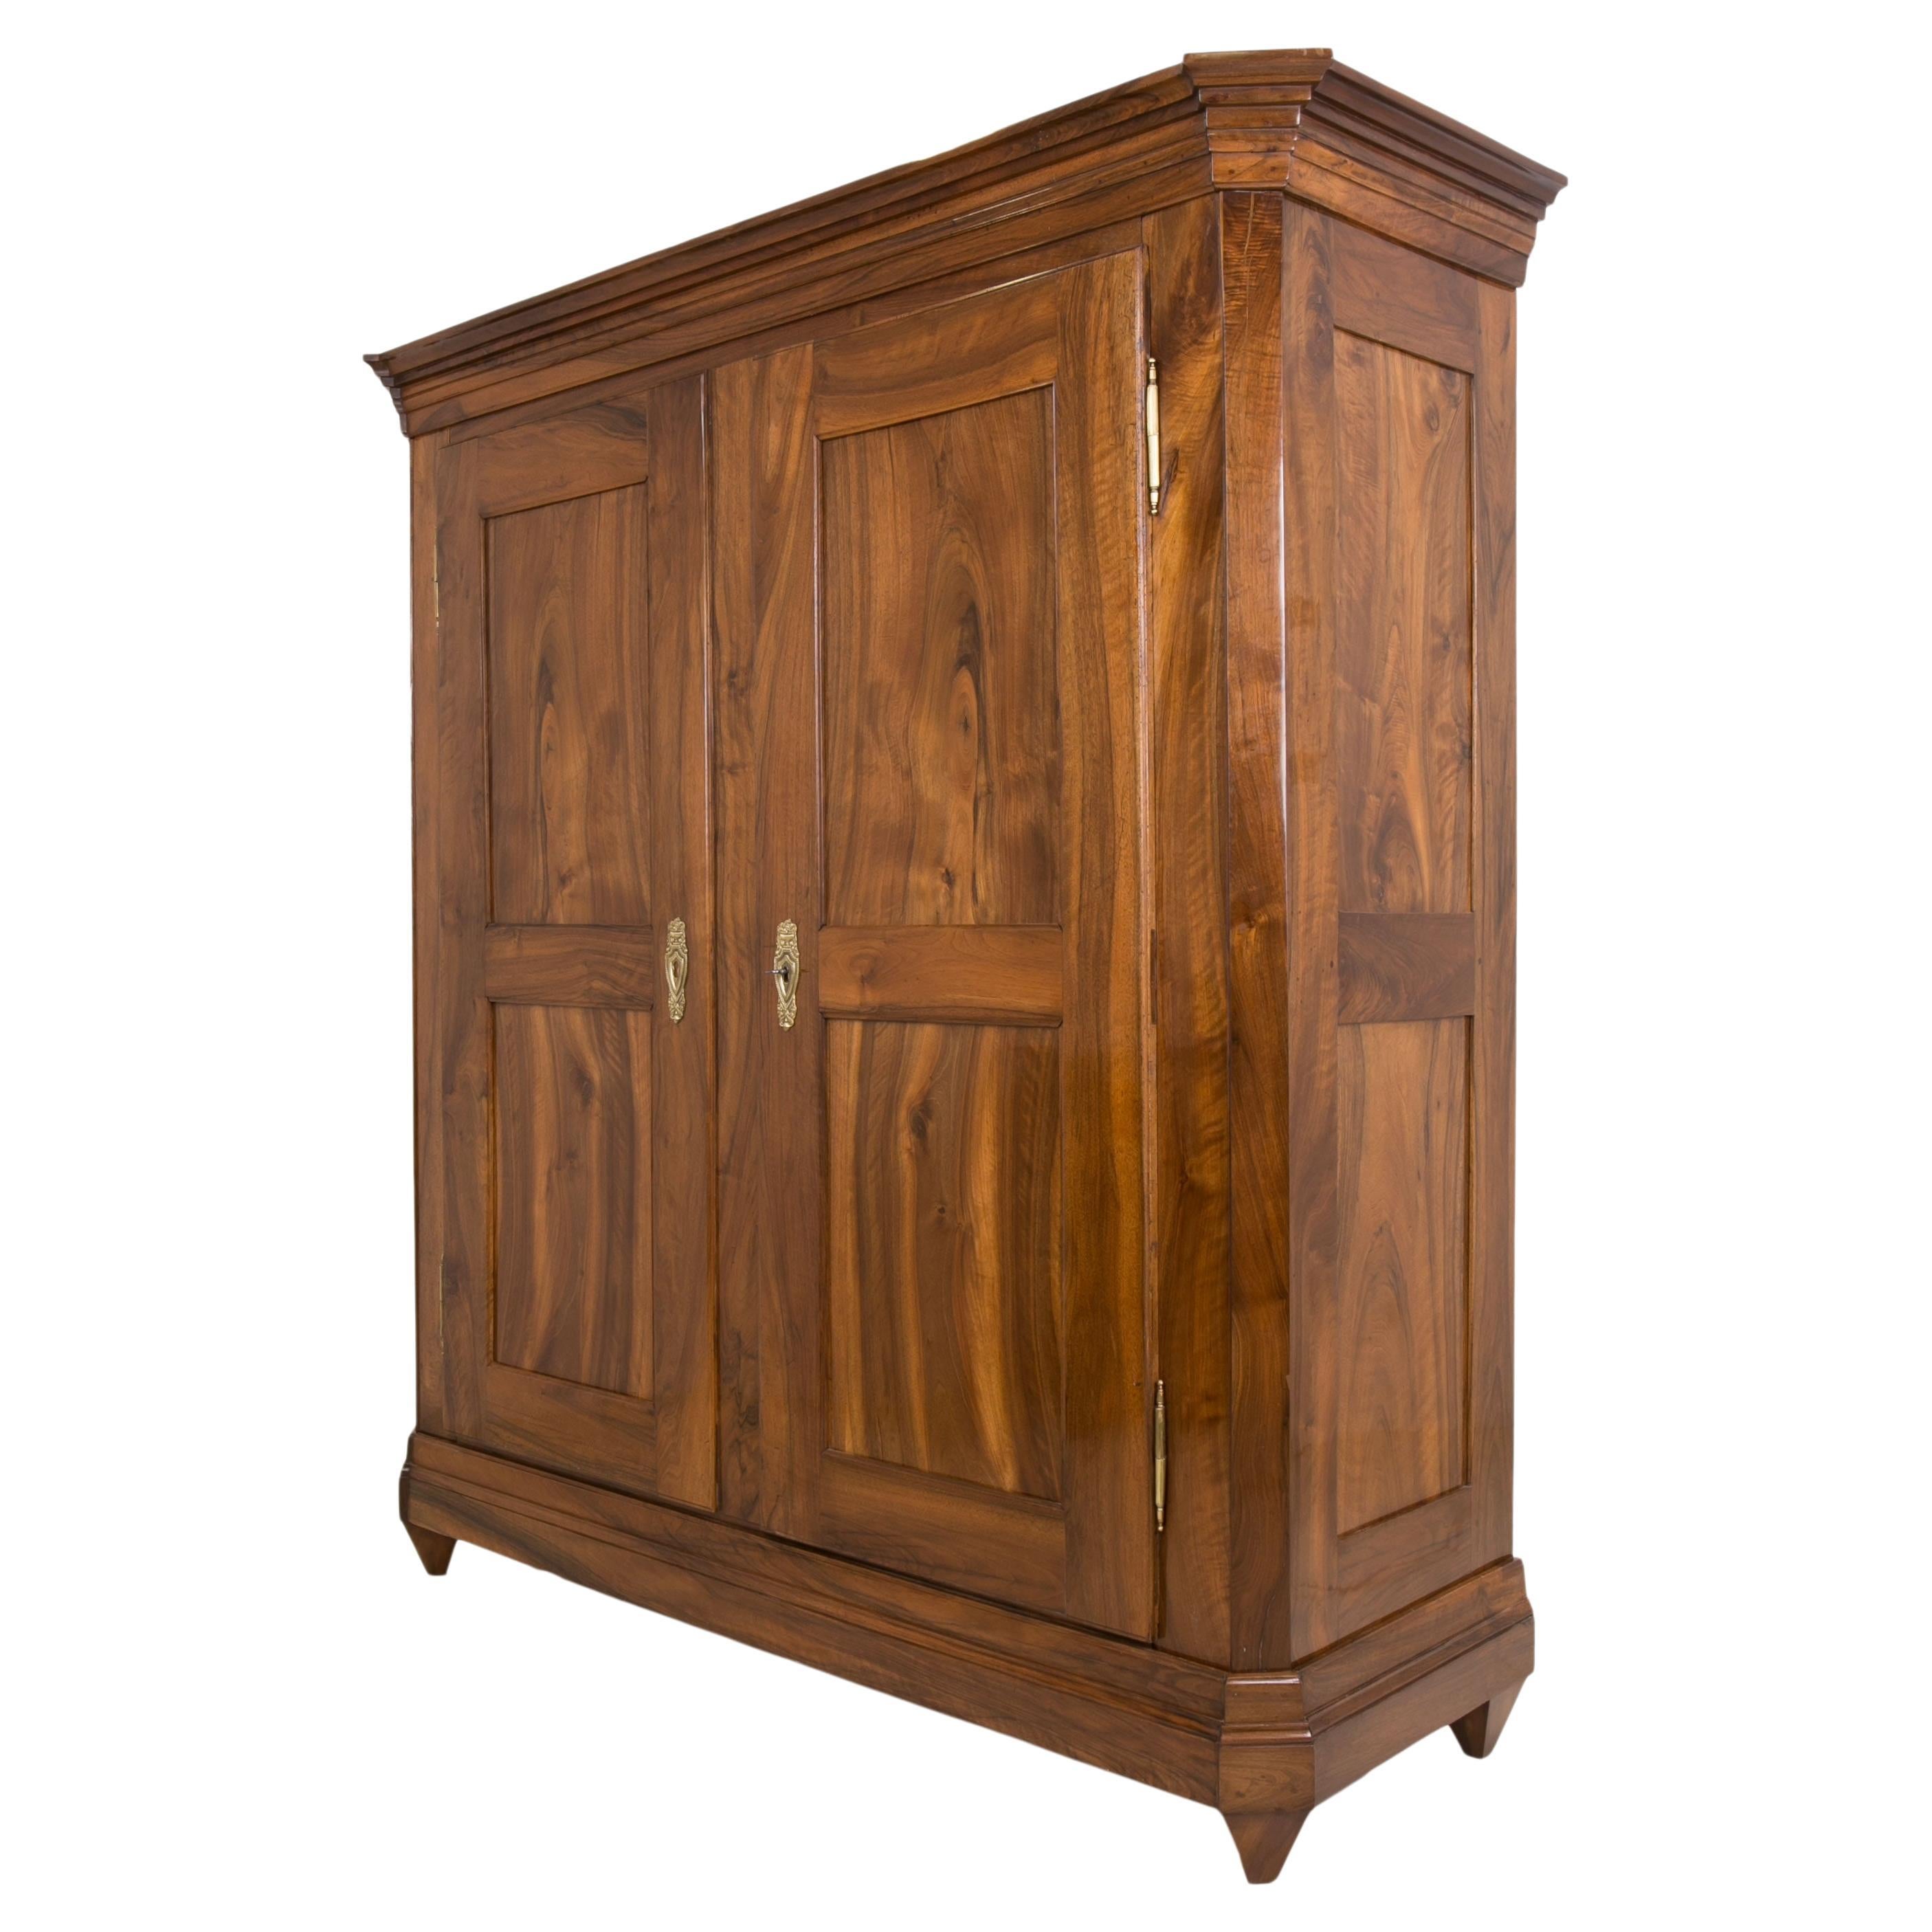 Large Wardrobe in Solid Walnut Wood, Germany, Early 19th Century